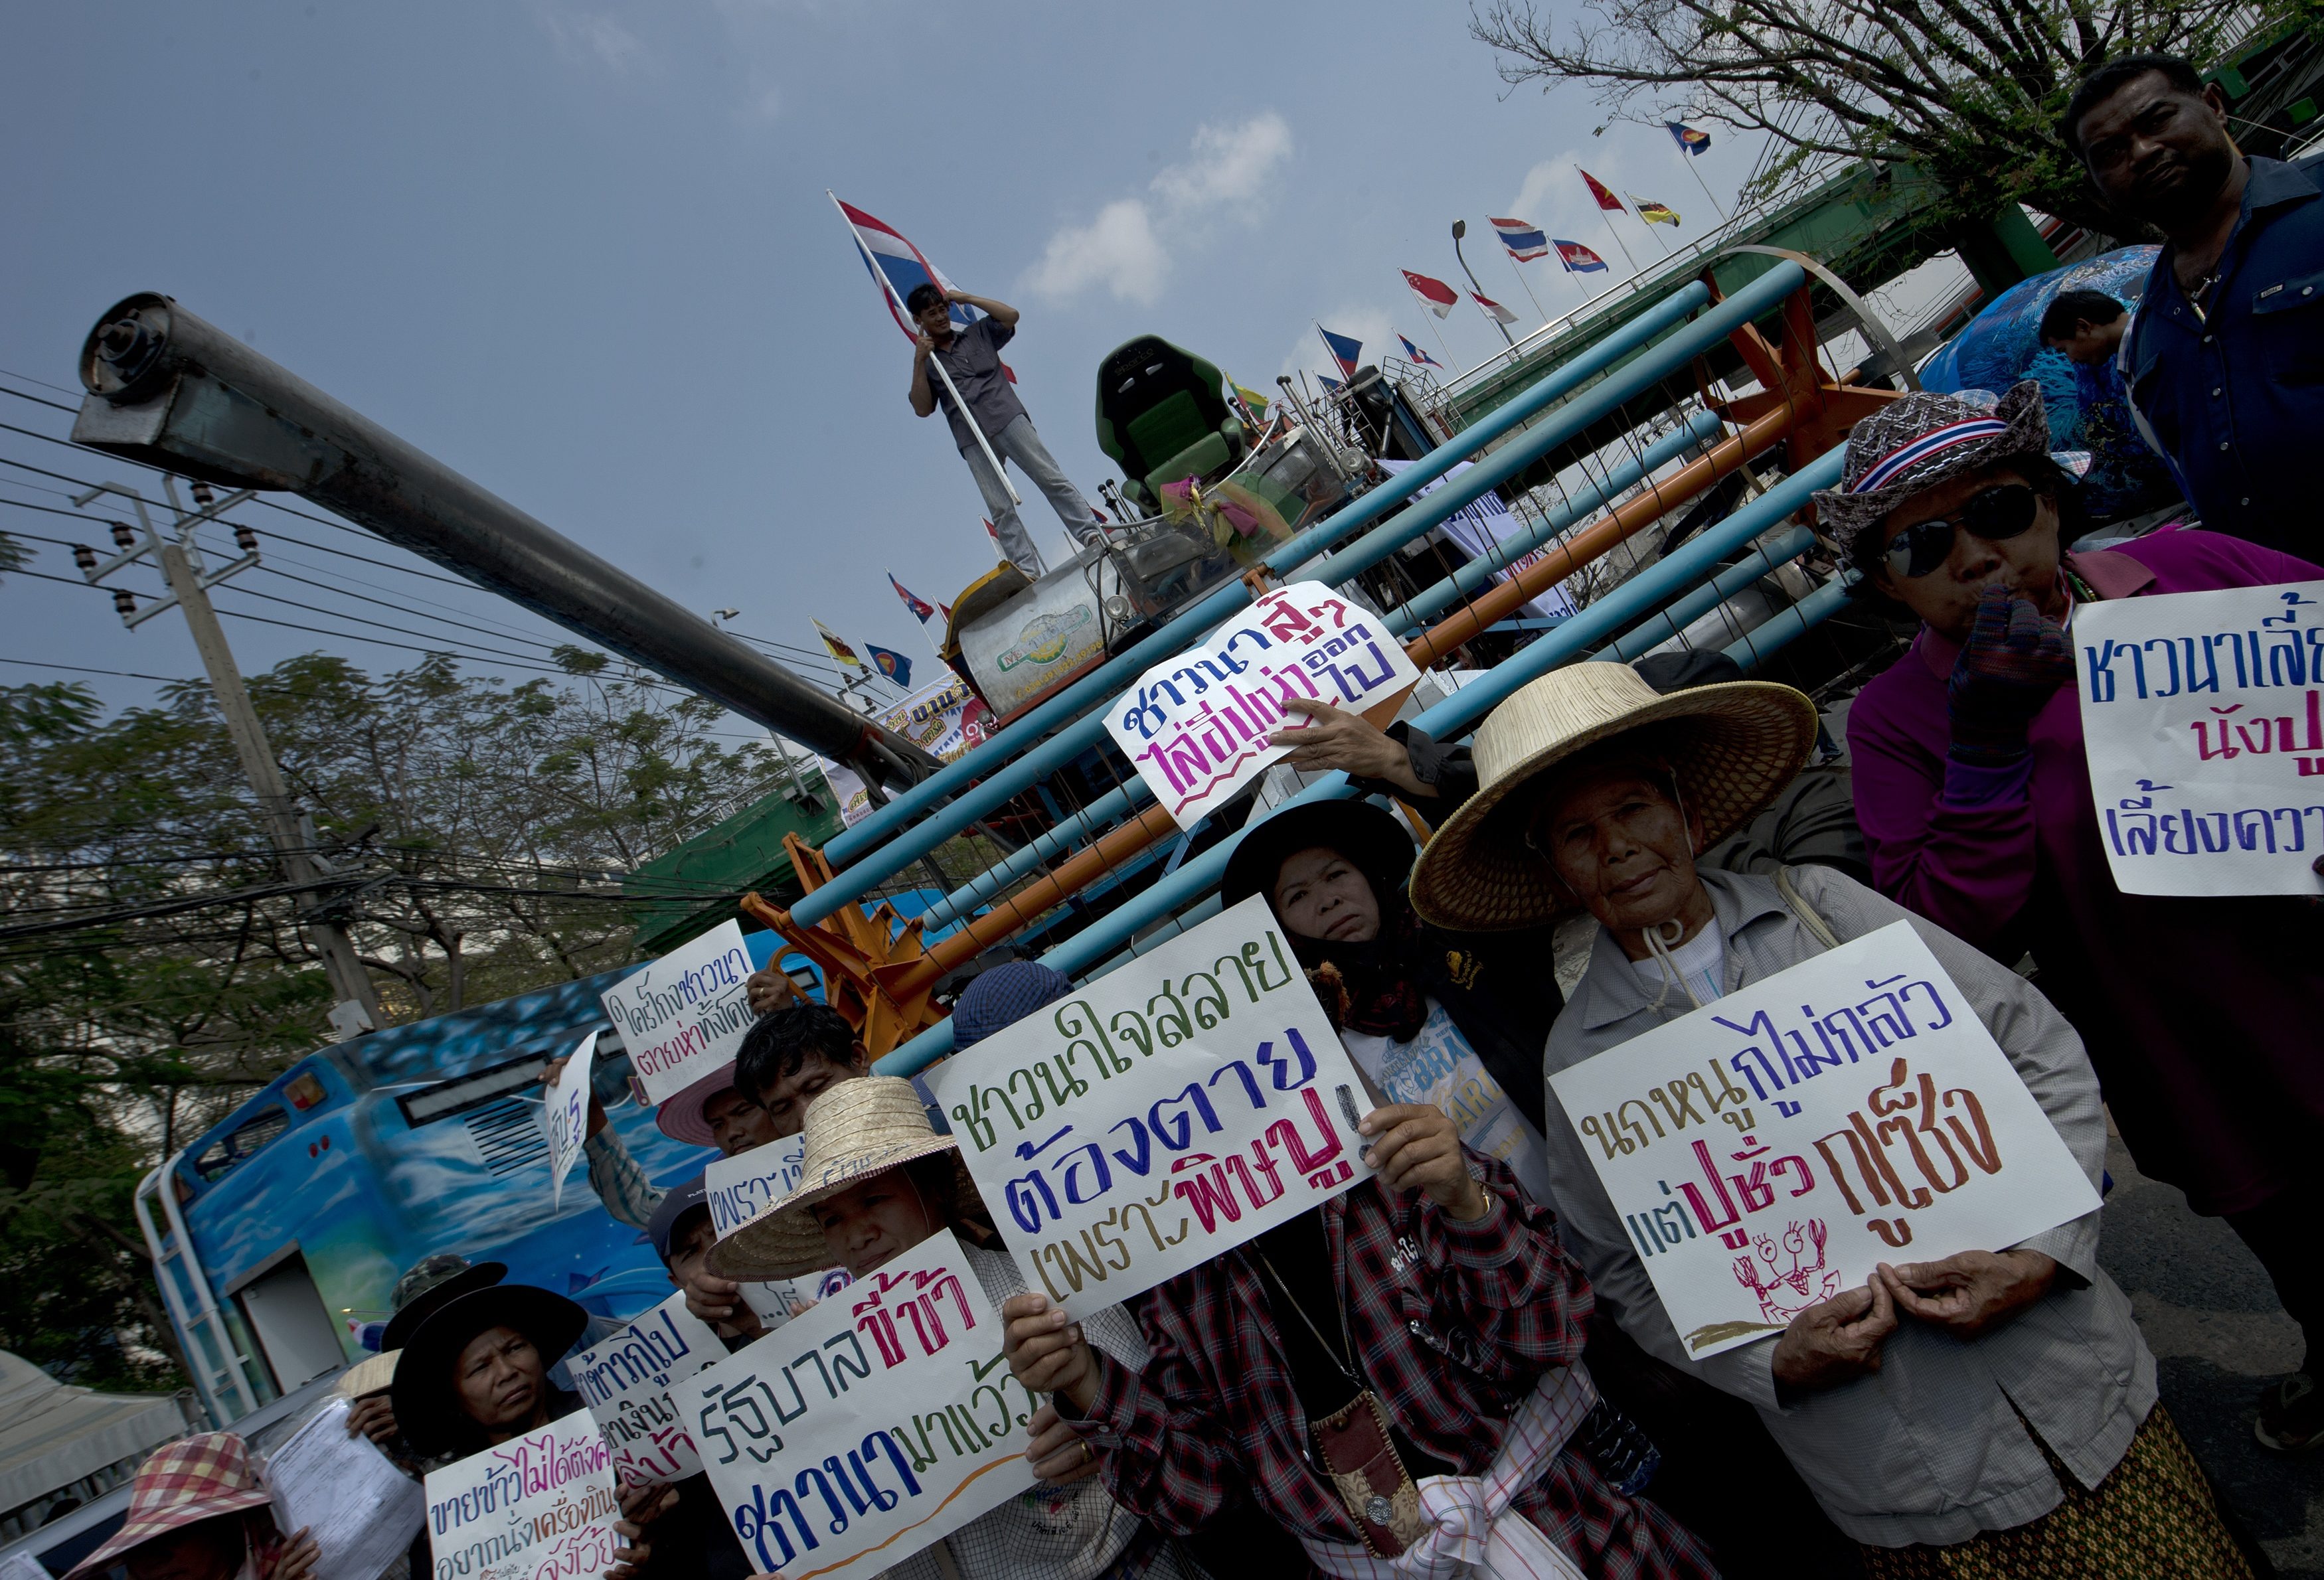 Thai farmers hold protest palcards next to a tractor as they protest the governments delayed payments for rice submitted to the pledging scheme, at the Commerce Ministry in Nonthaburi province on February 6, 2014. Thailand's embattled government on February 6 defended a much-criticised rice subsidy scheme after a Chinese firm cancelled a one million tonne order for stockpiled grain, following a graft probe into Thai officials. AFP PHOTO / PORNCHAI KITTIWONGSAKUL / AFP PHOTO / PORNCHAI KITTIWONGSAKUL